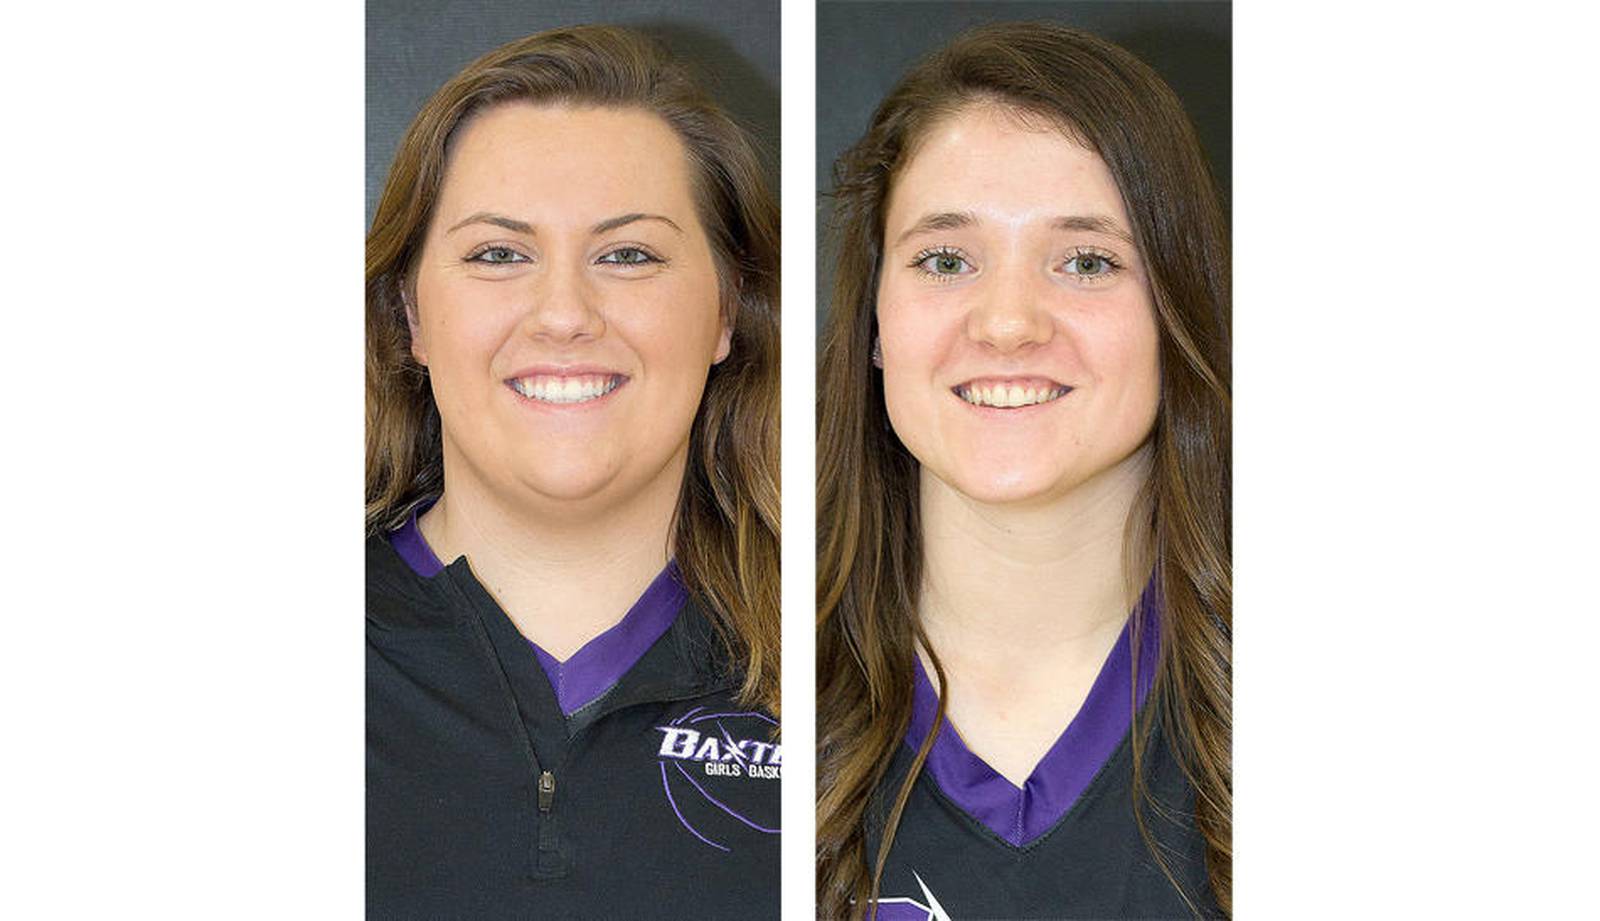 Two Baxter girls earn allconference recognition Newton Daily News